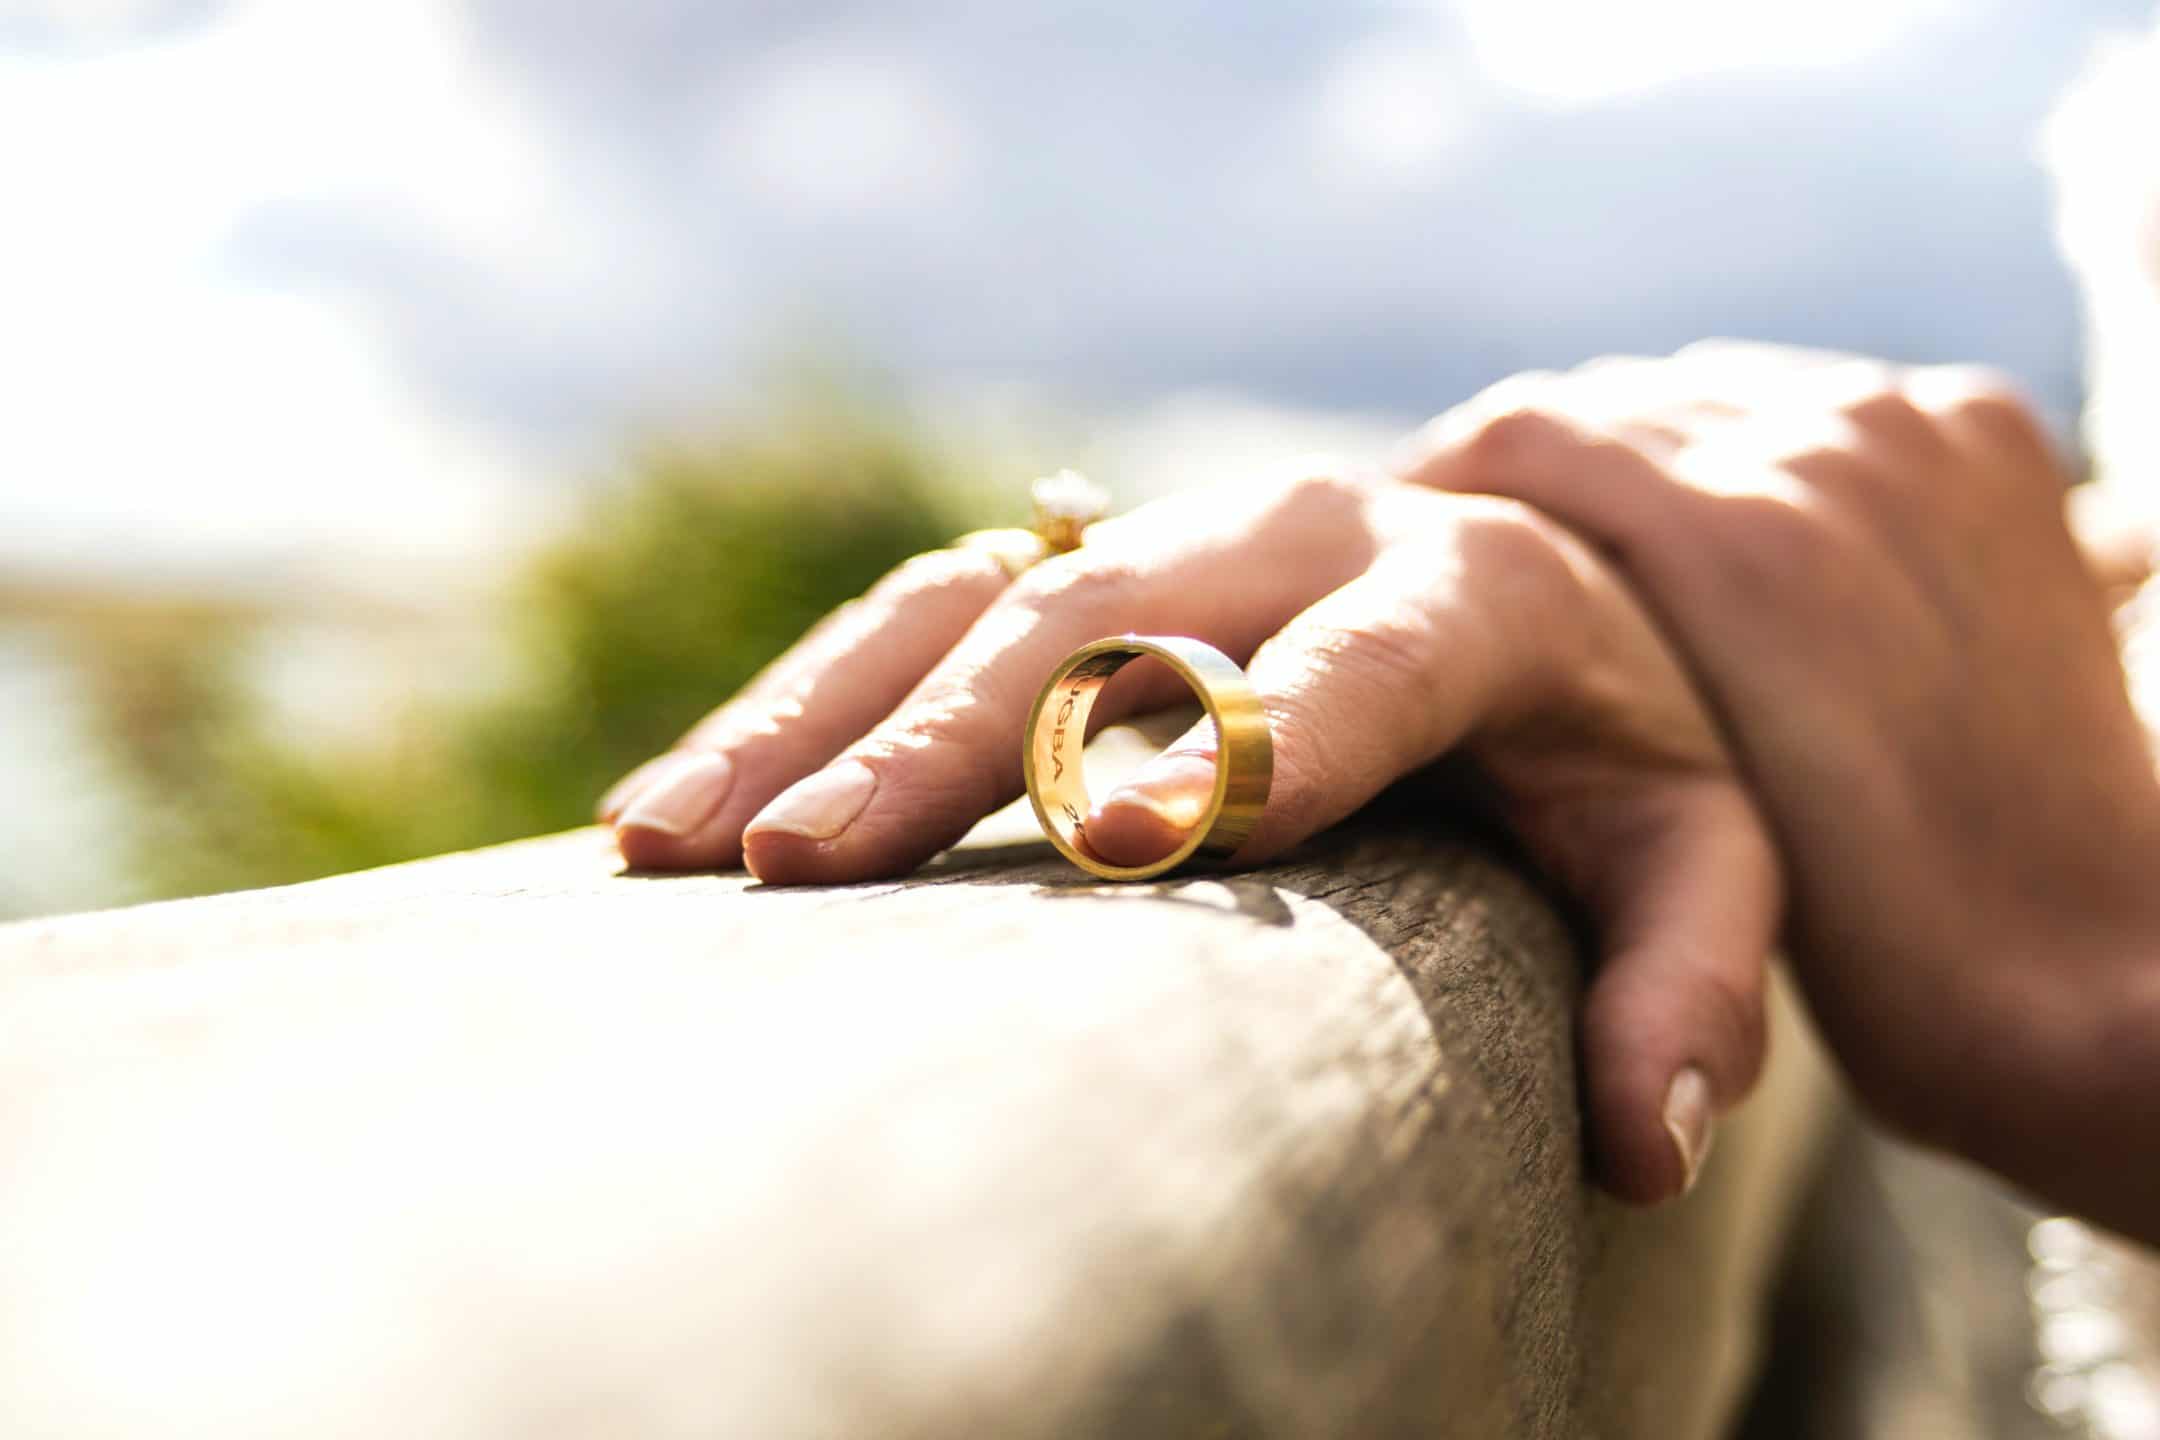 a person's hand rests on a low wall with their wedding ring slipped off